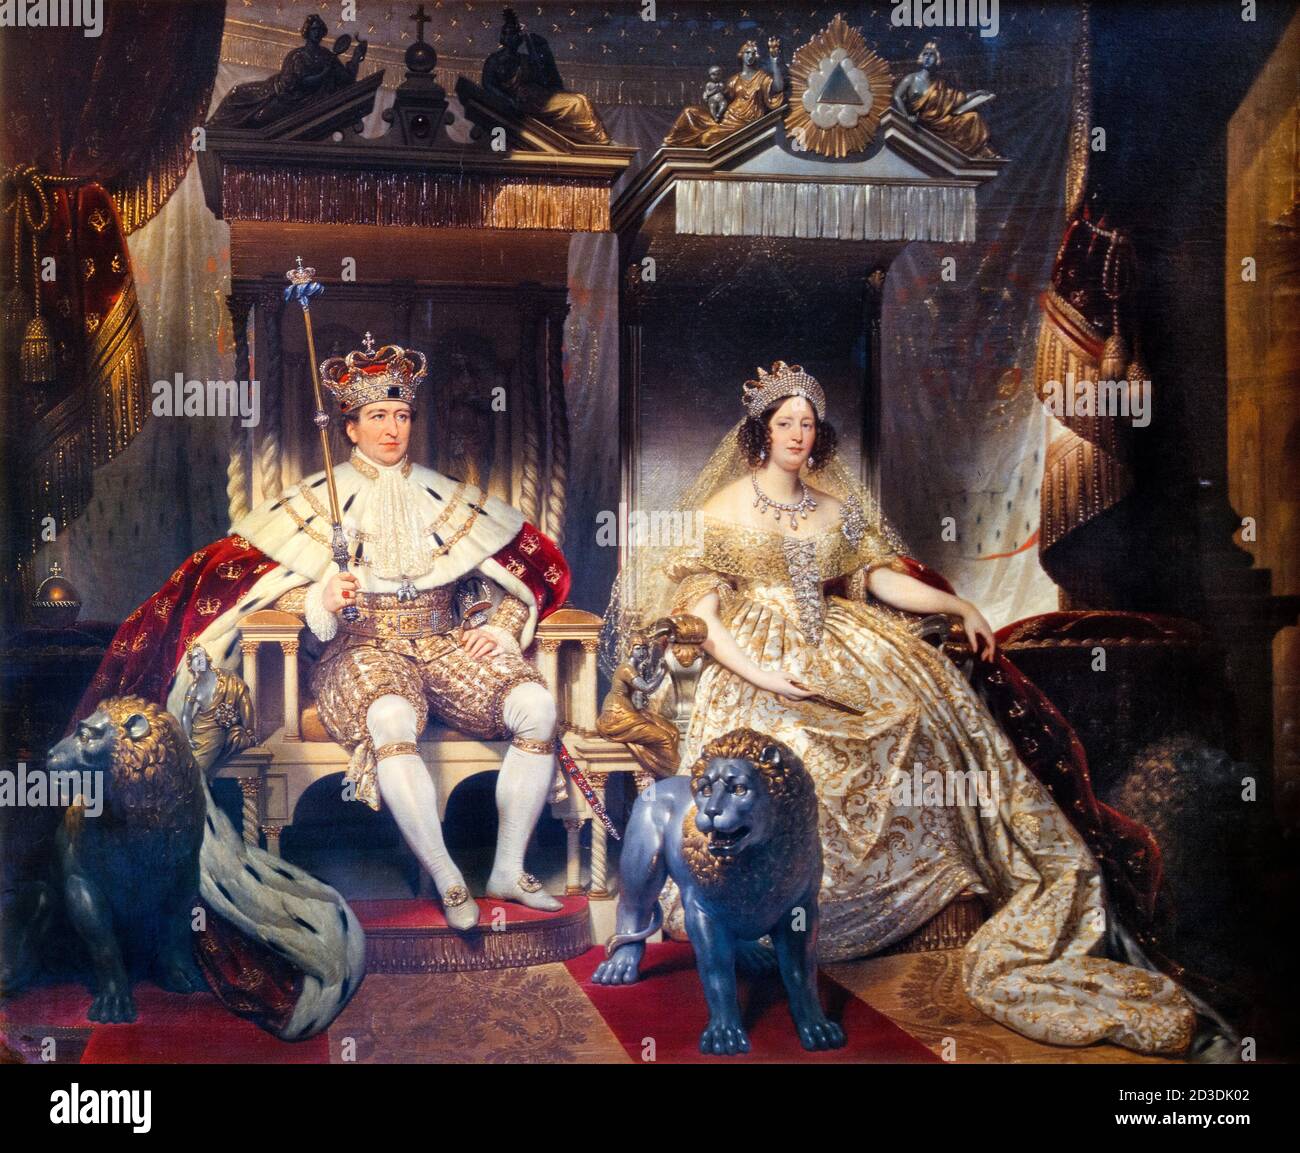 King Christian VIII of Denmark (1786-1848) and his Consort, Queen Caroline Amalie (1796-1881), in anointing costumes at his Coronation on 28th June 1840, portrait painting by Joseph Desire Court, 1840-1841 Stock Photo